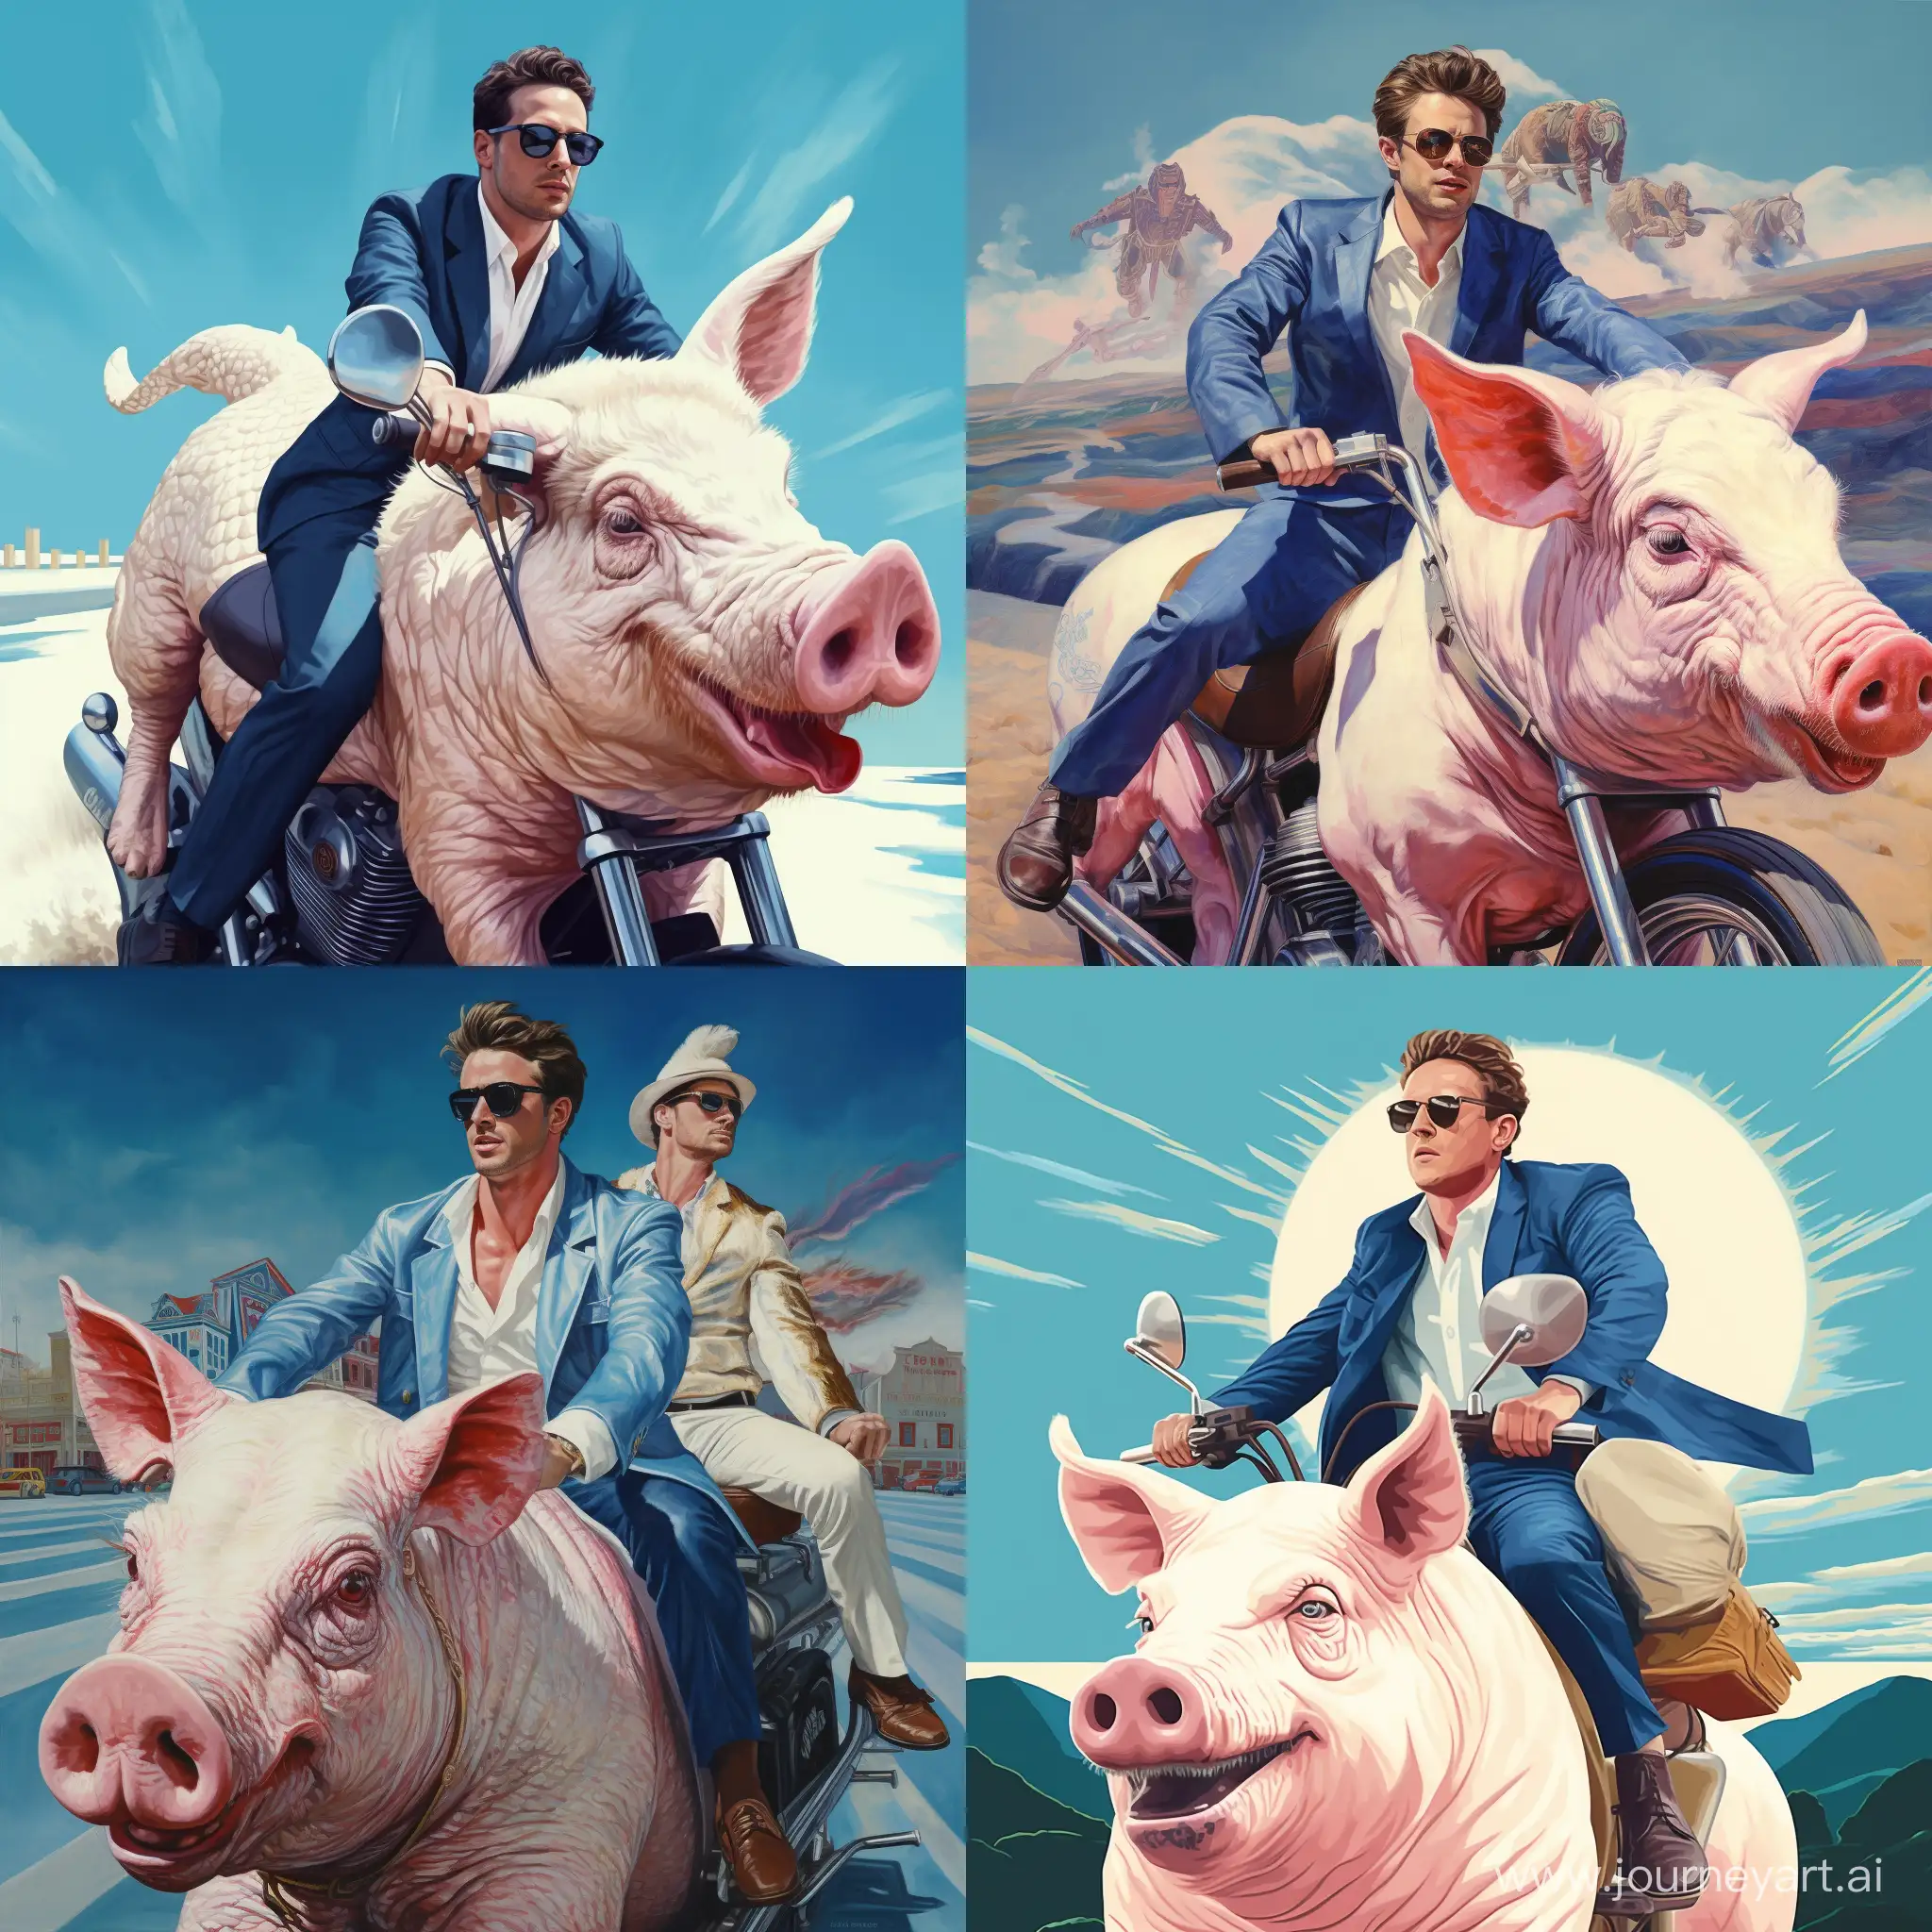 Playful-Adventure-Man-in-White-Leather-Jacket-Riding-a-Blue-Pig